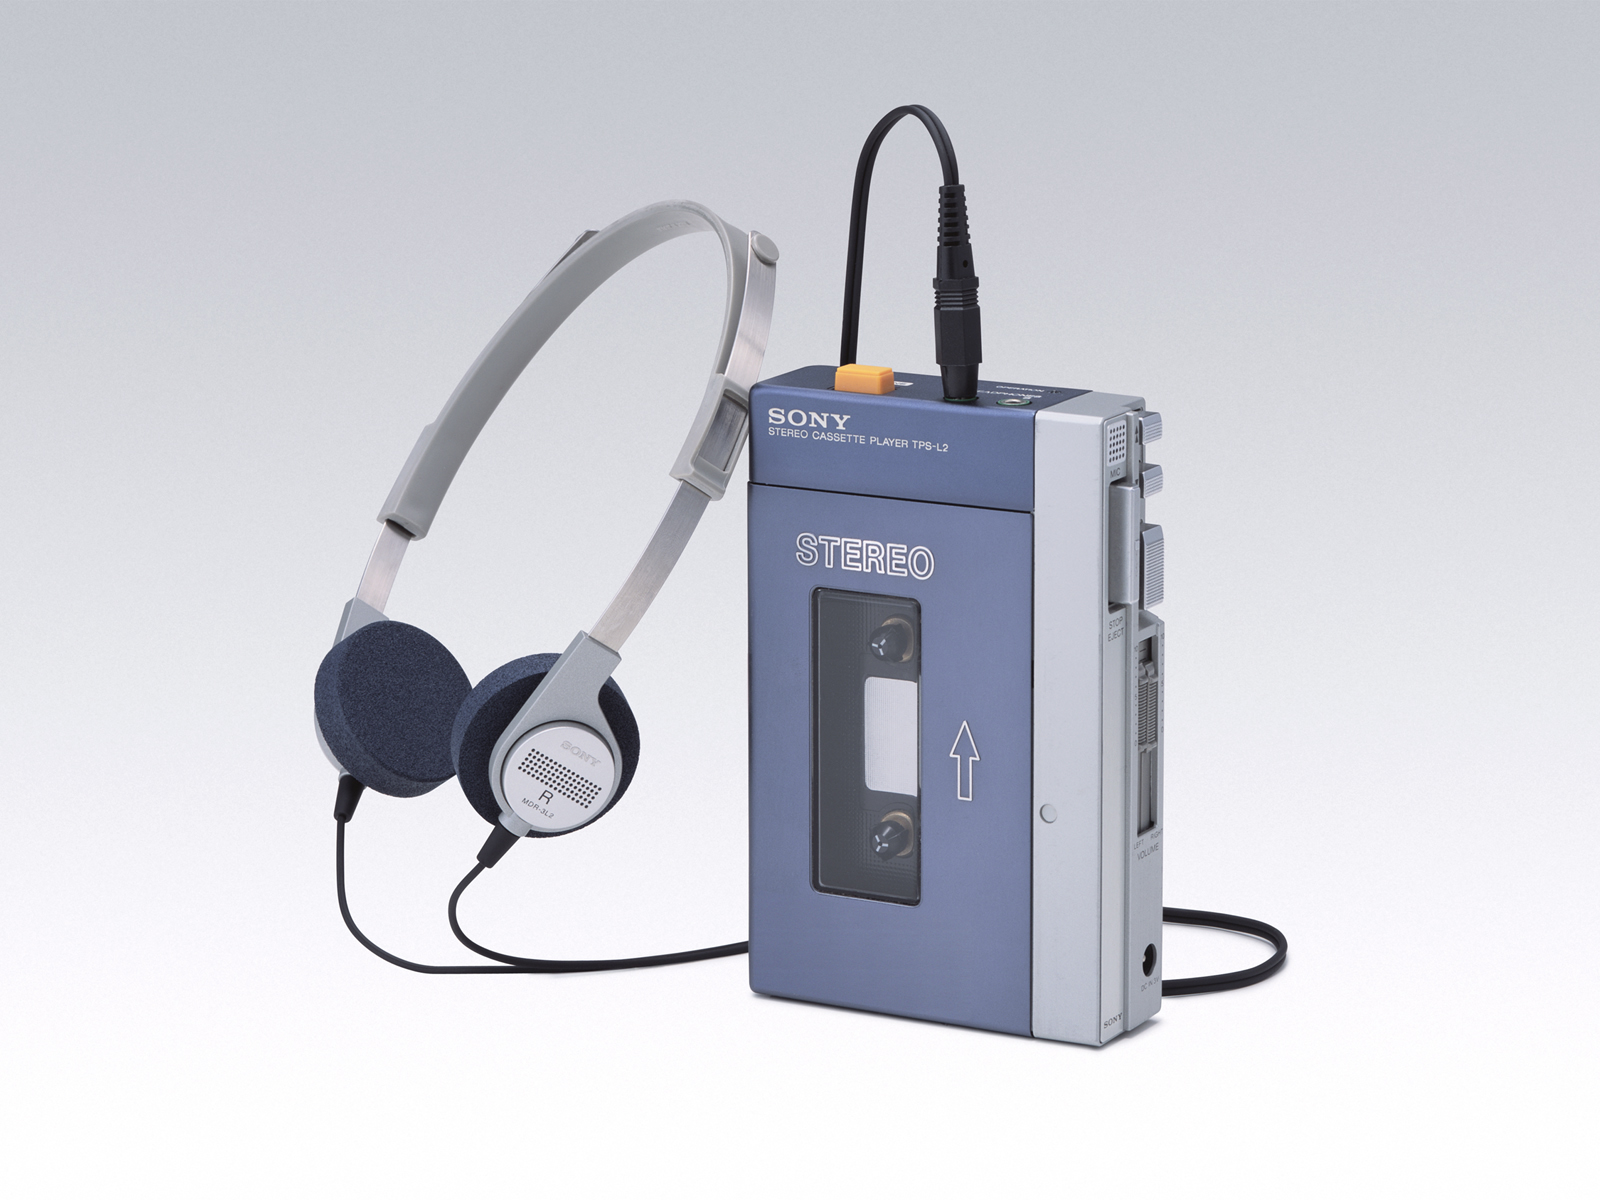 Music to go: Walkman debuted 35 years ago